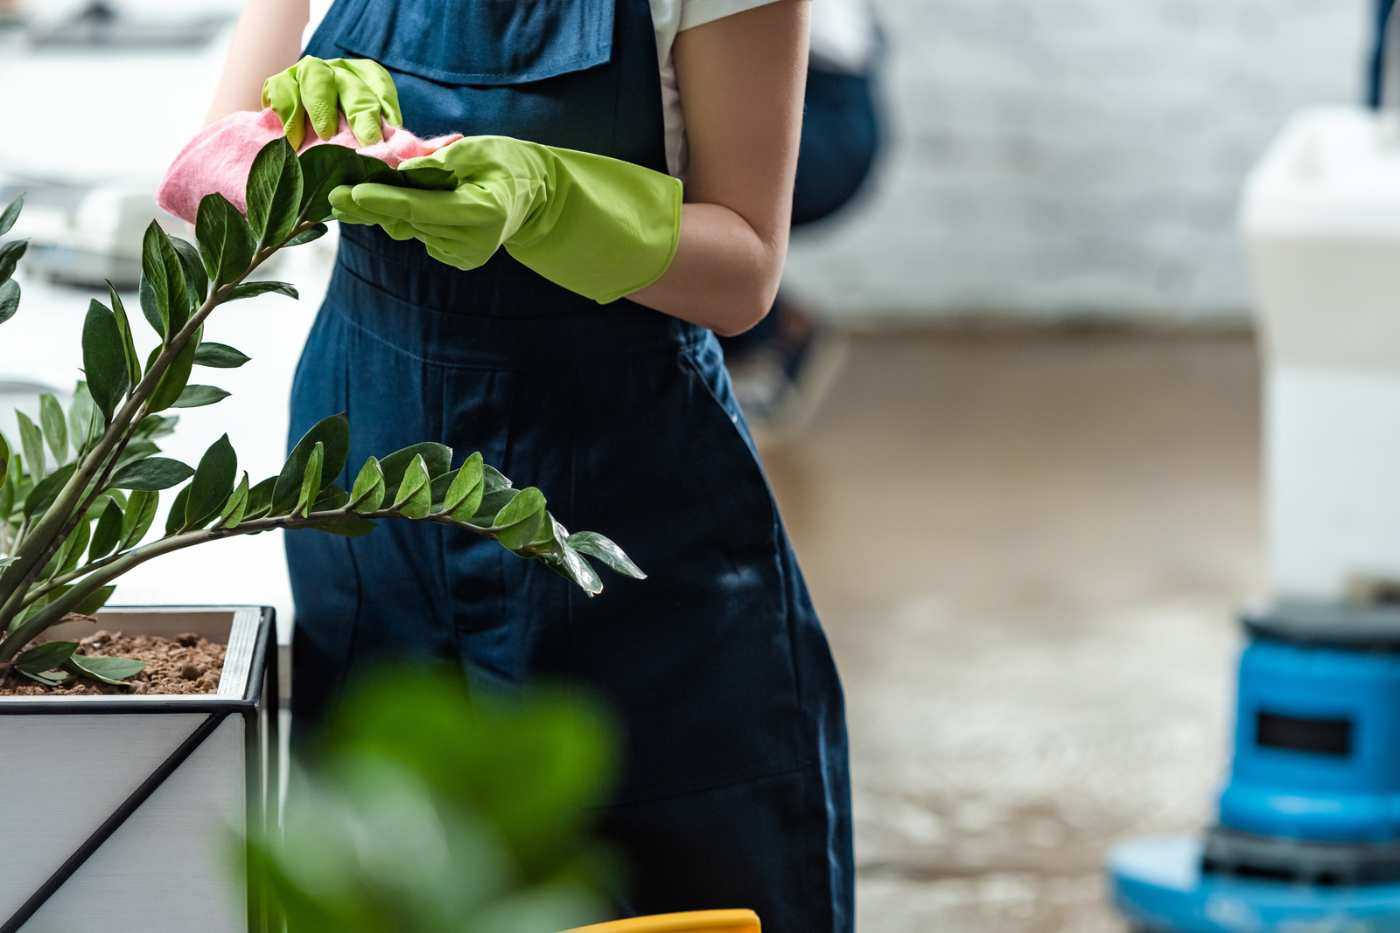 Professional Cleaner Wiping Down An Artificial Plant